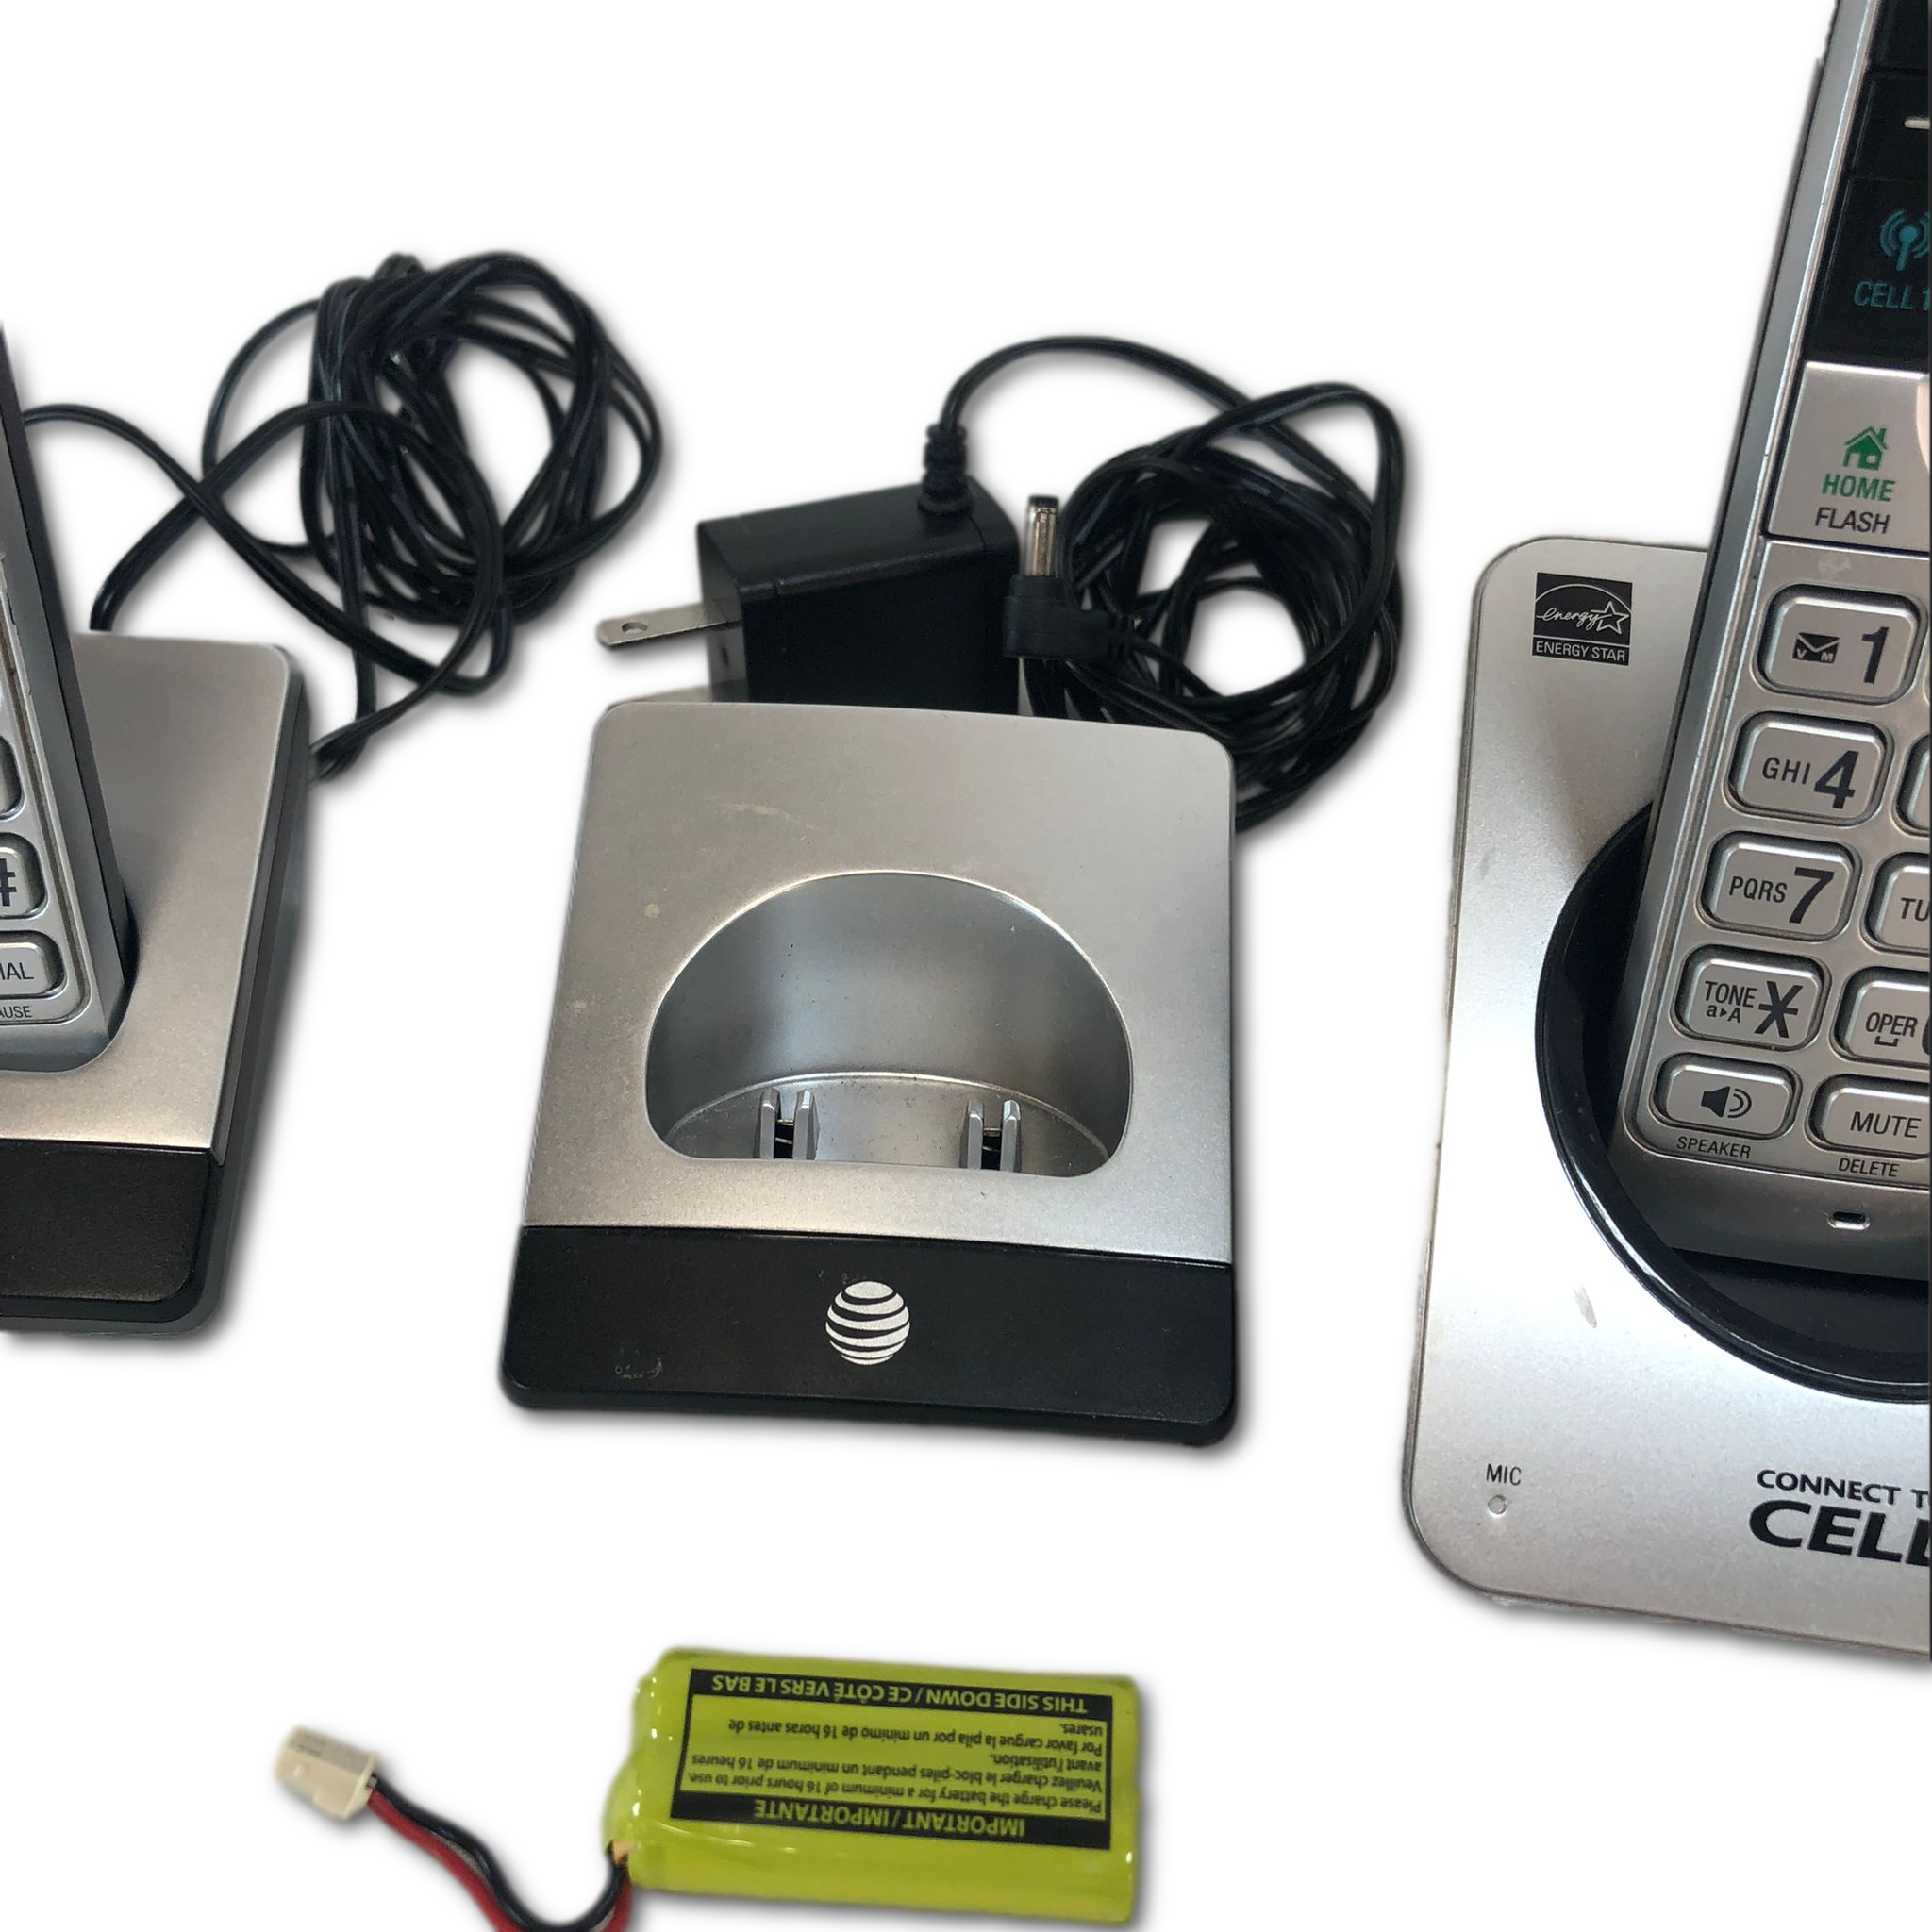 AT&T 3 Handset Connect to Cell Answering System - Lightly Used